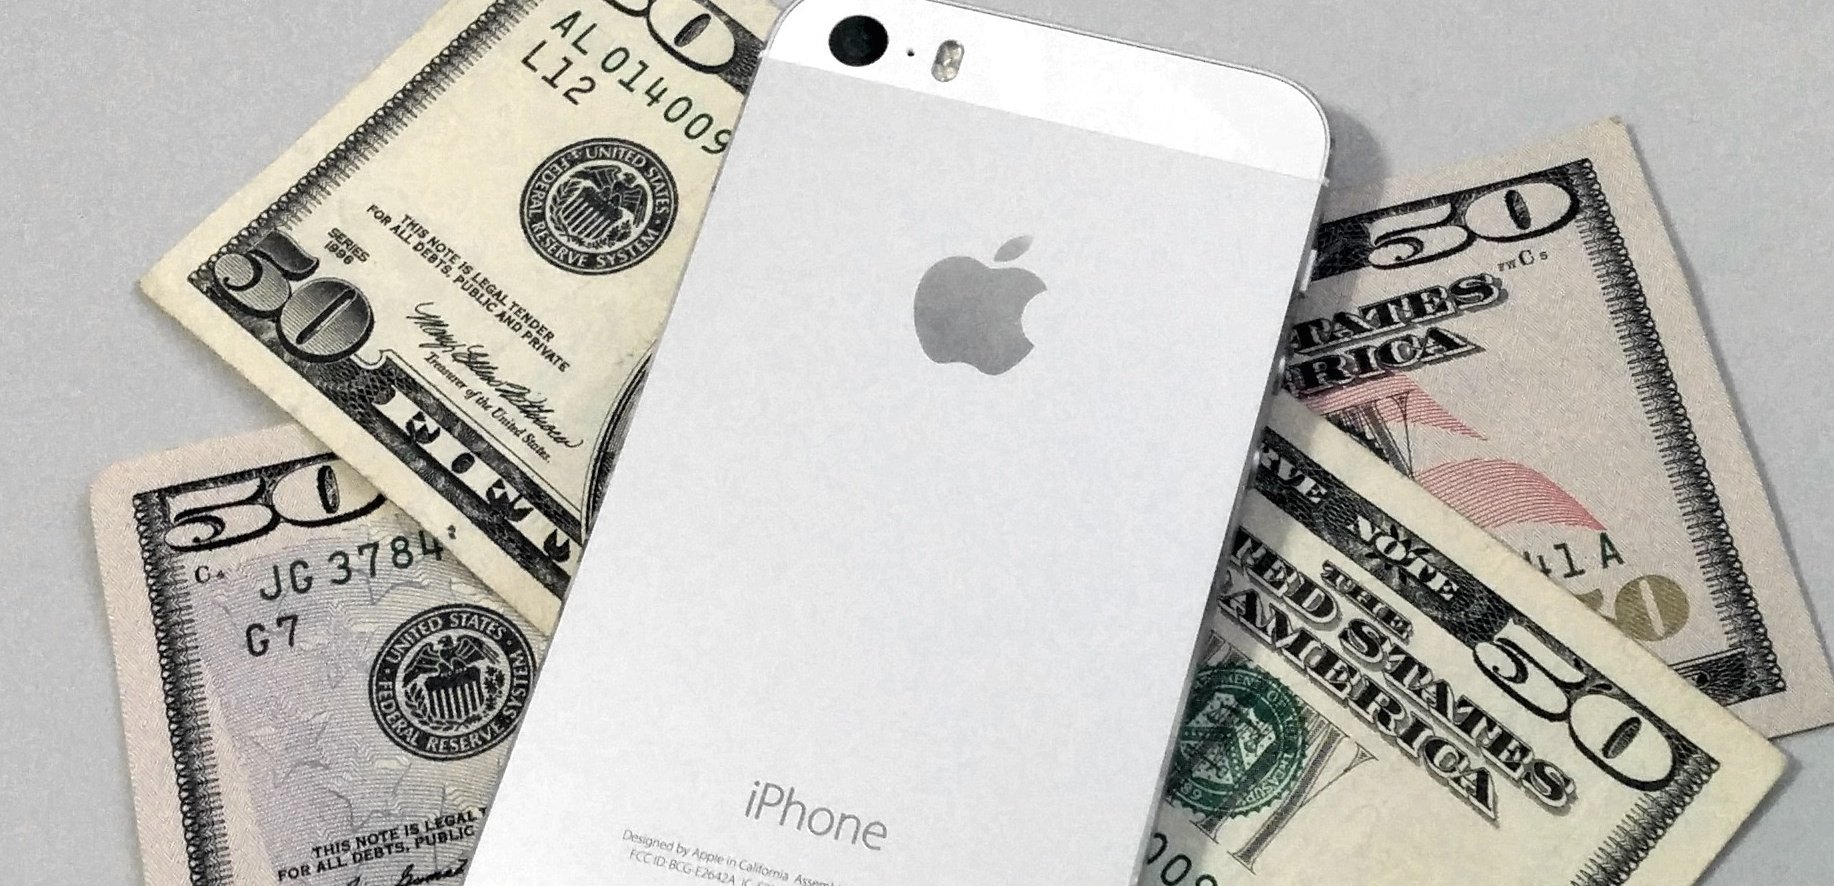 Even if Apple doesn't raise the iPhone 6 price many consumers could pay more for a new iPhone.